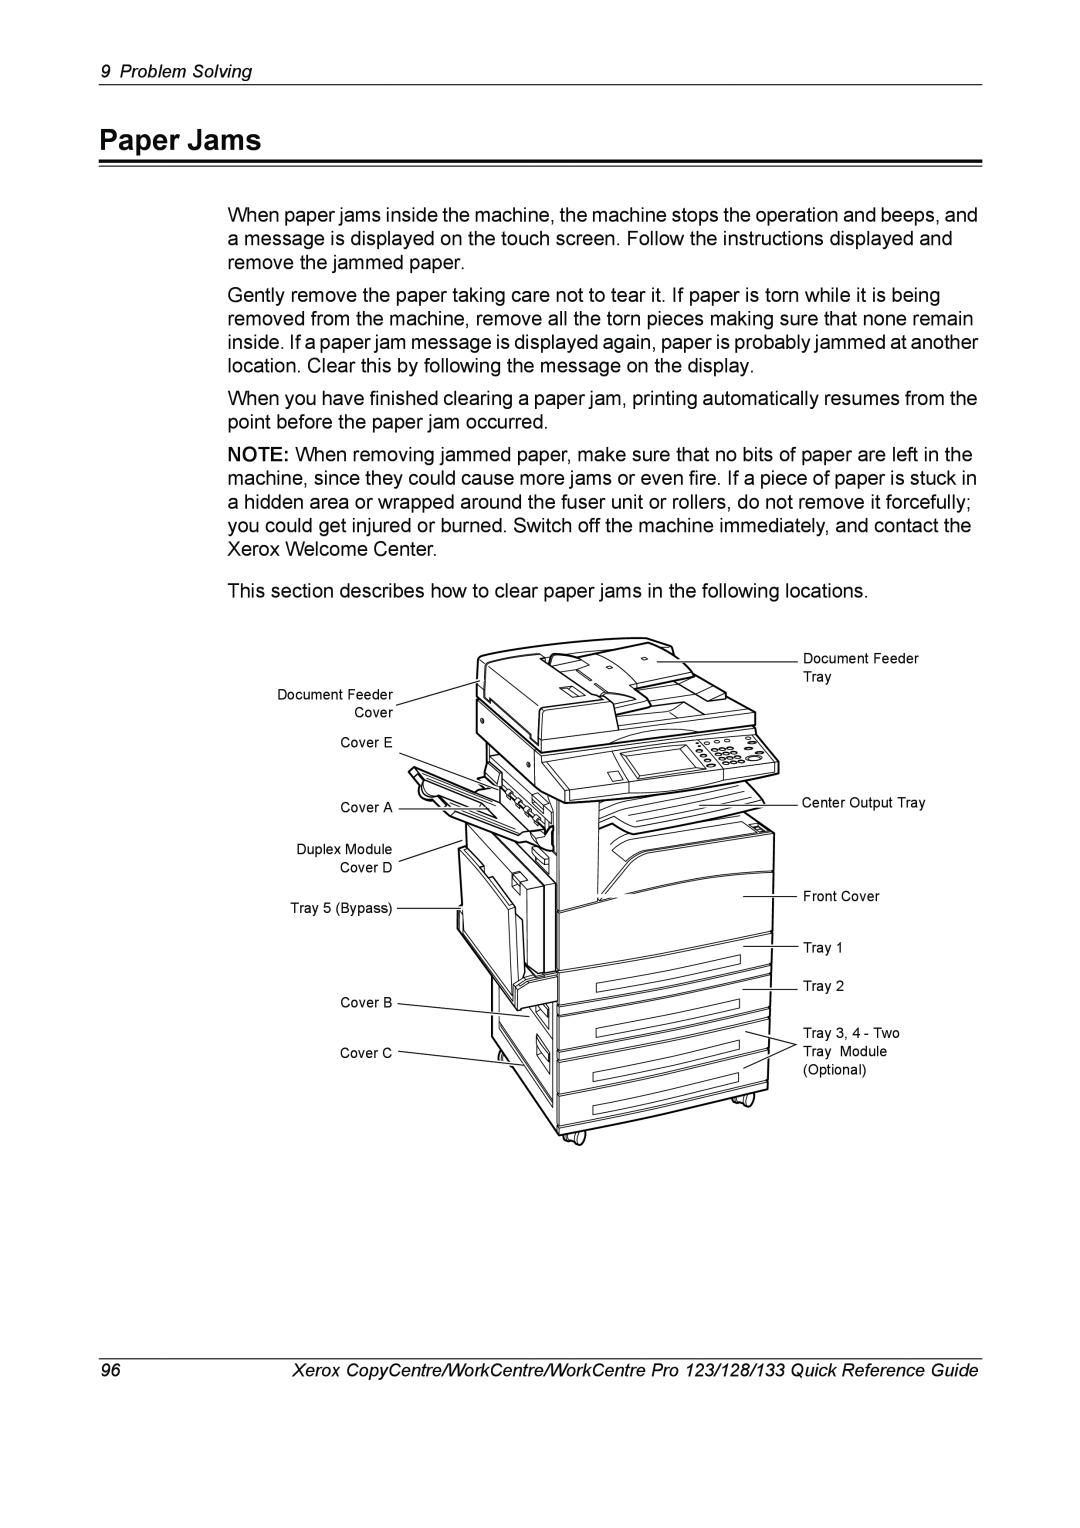 Xerox 604P18037 Paper Jams, Document Feeder Cover Cover E Cover A Duplex Module Cover D, Tray 5 Bypass, Front Cover Tray 